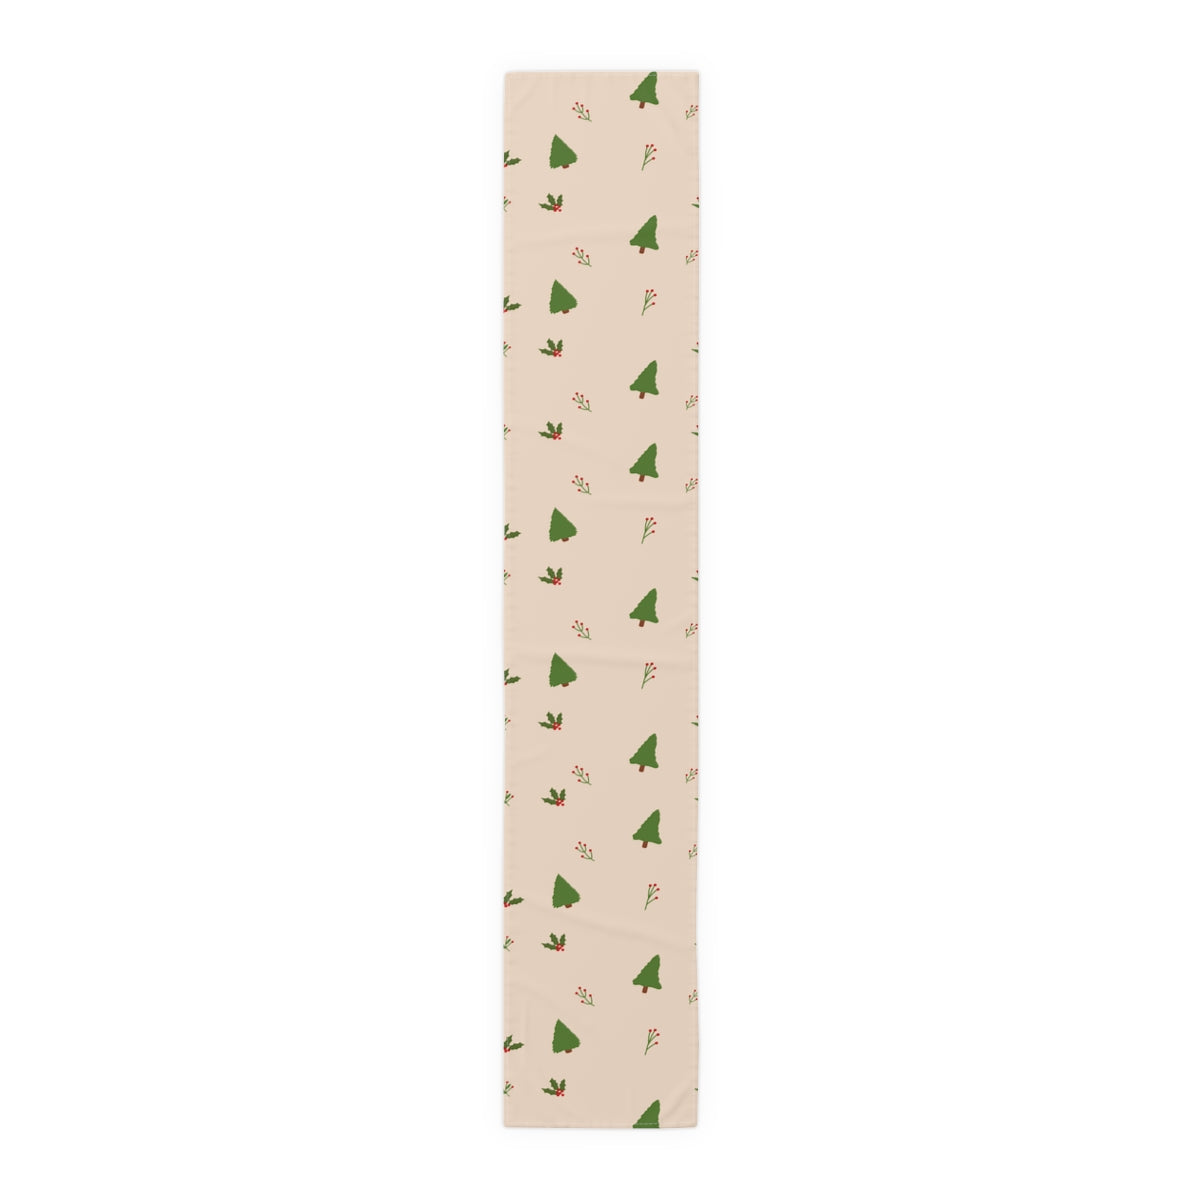 Beige Holiday Table Runner - Holly & Evergreen Trees